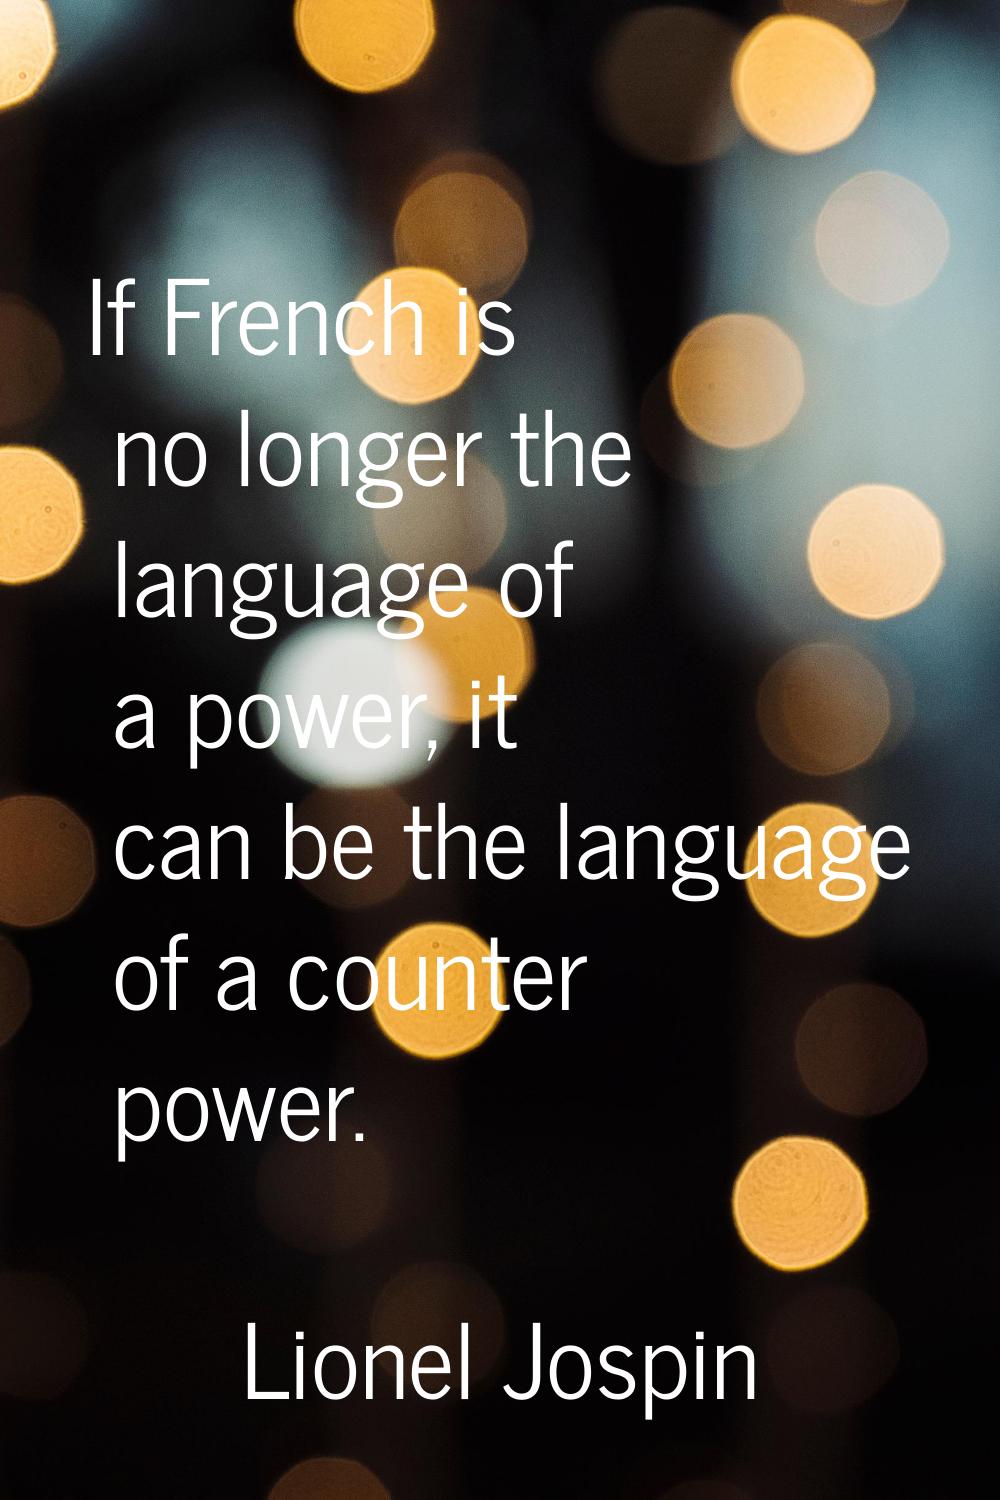 If French is no longer the language of a power, it can be the language of a counter power.